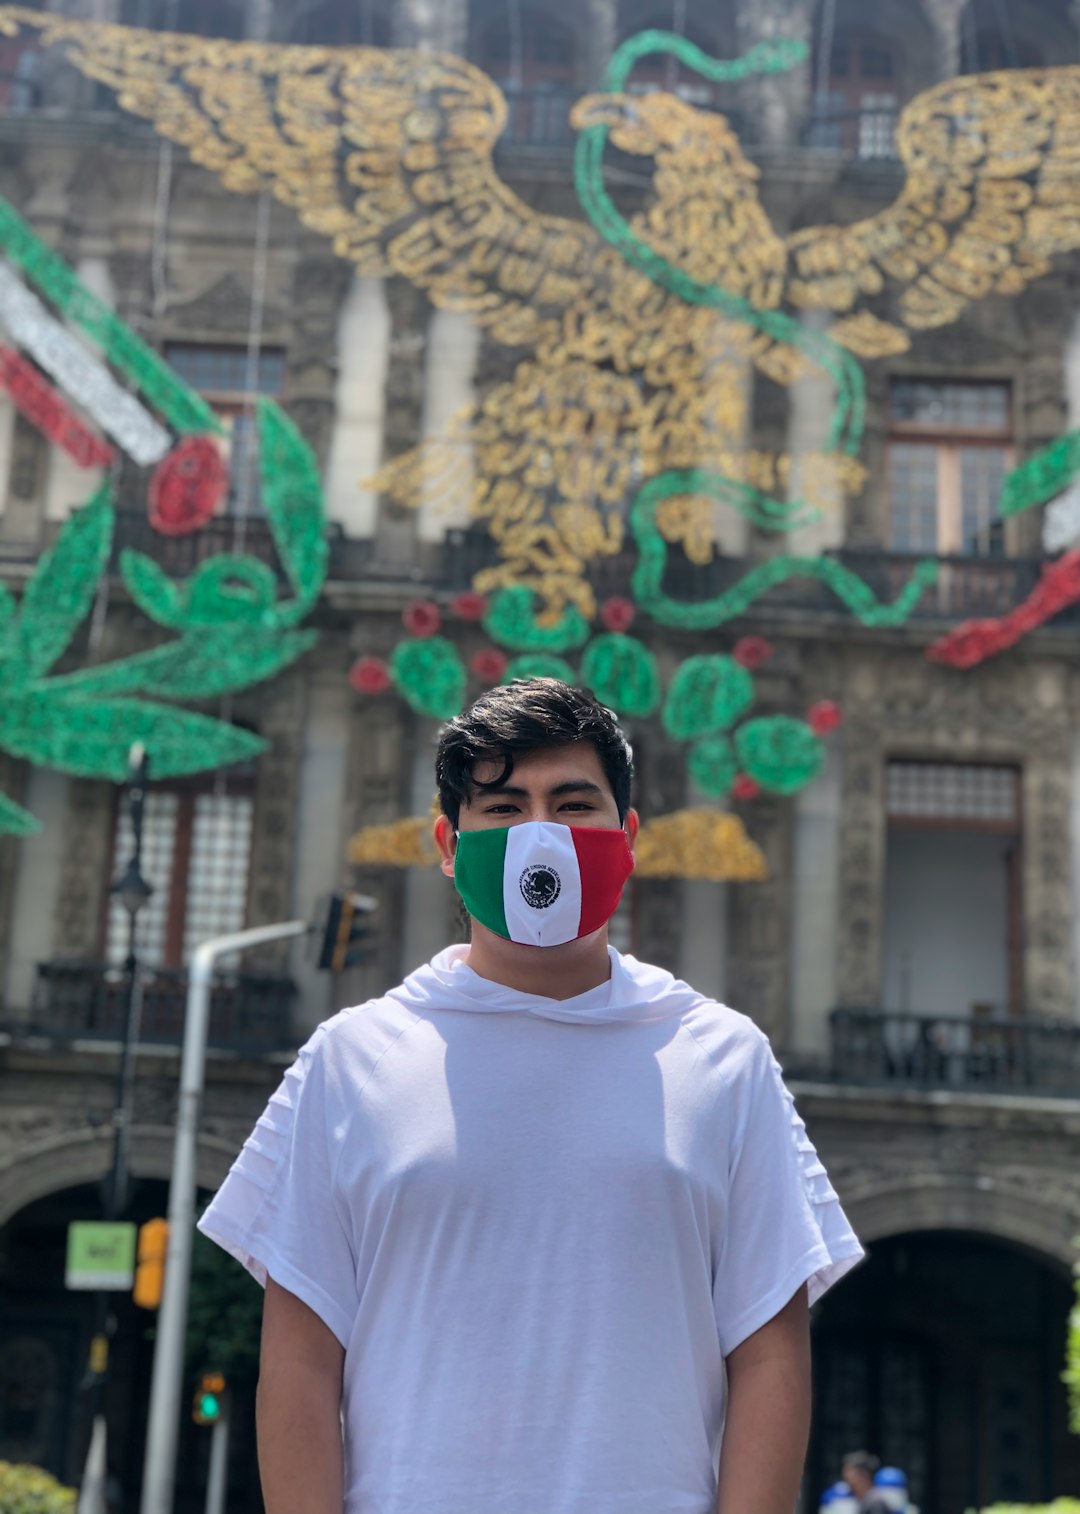 Travel Tips and Stories of Zócalo in Mexico